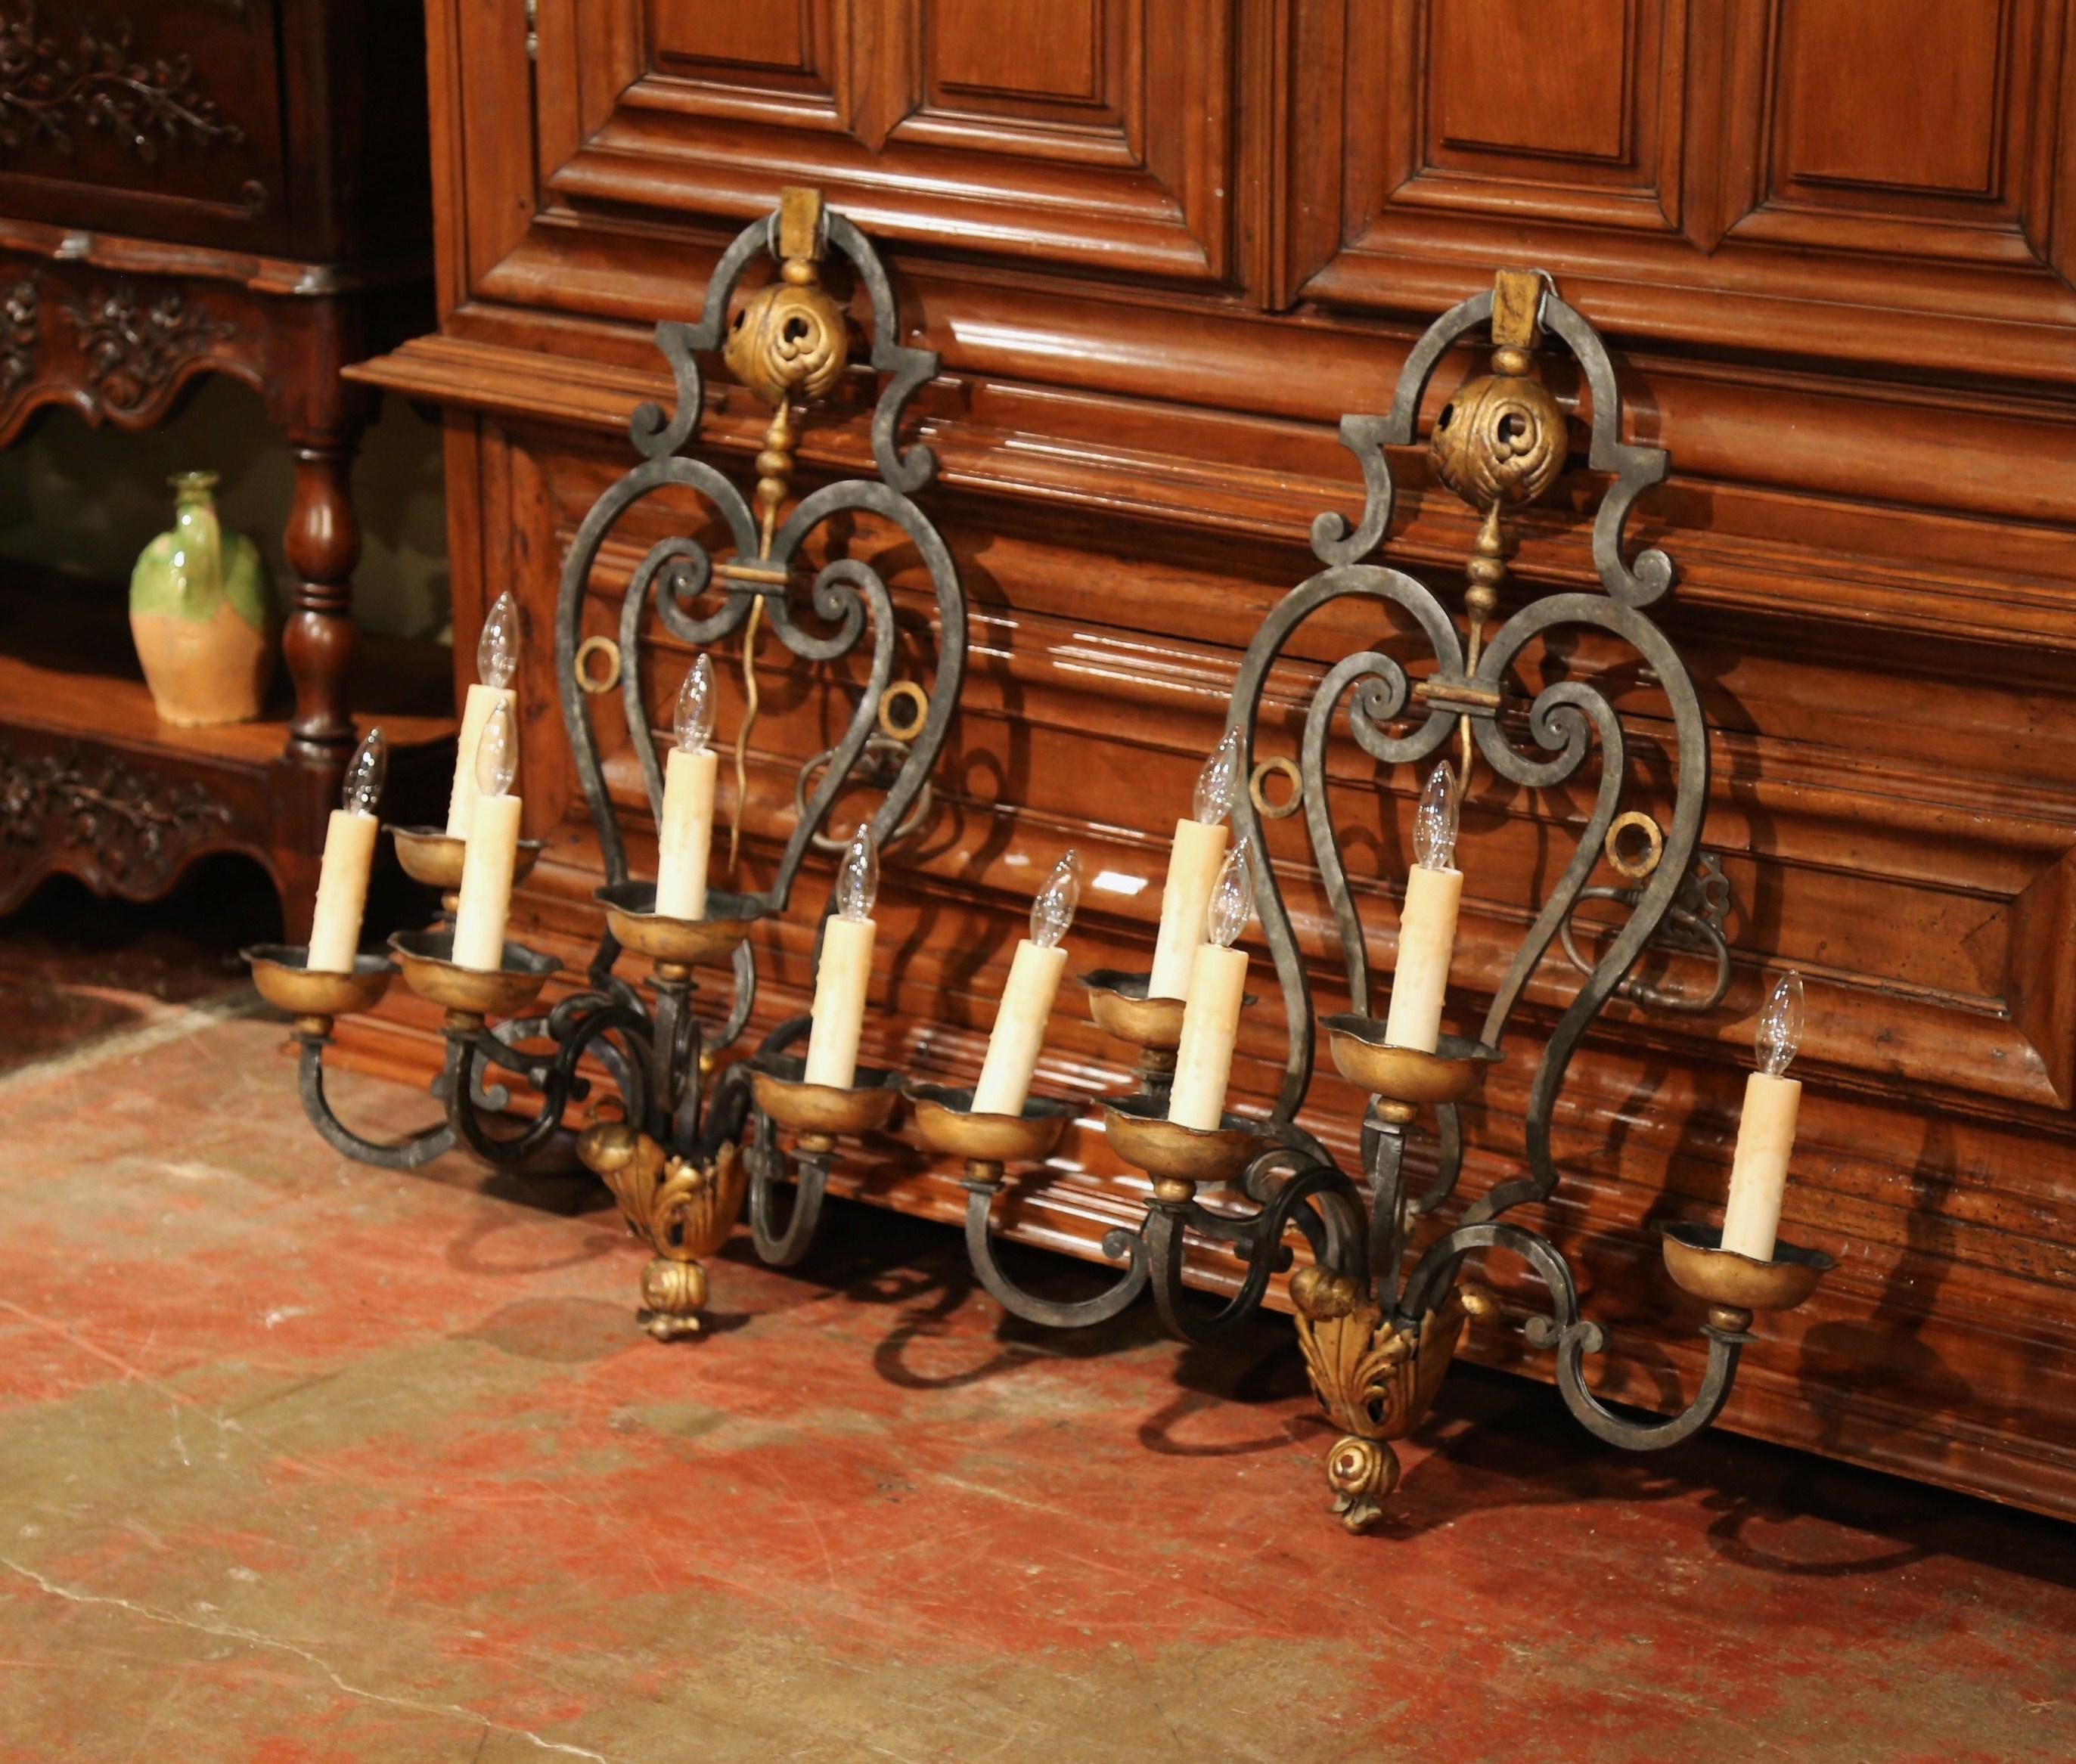 Place these important iron sconces on both side of your mantel for a grand, rustic look. Crafted in France, circa 1870, the large antique wall fixtures features five newly wired lights embellished with decorative wax candle sleeve covers. Each